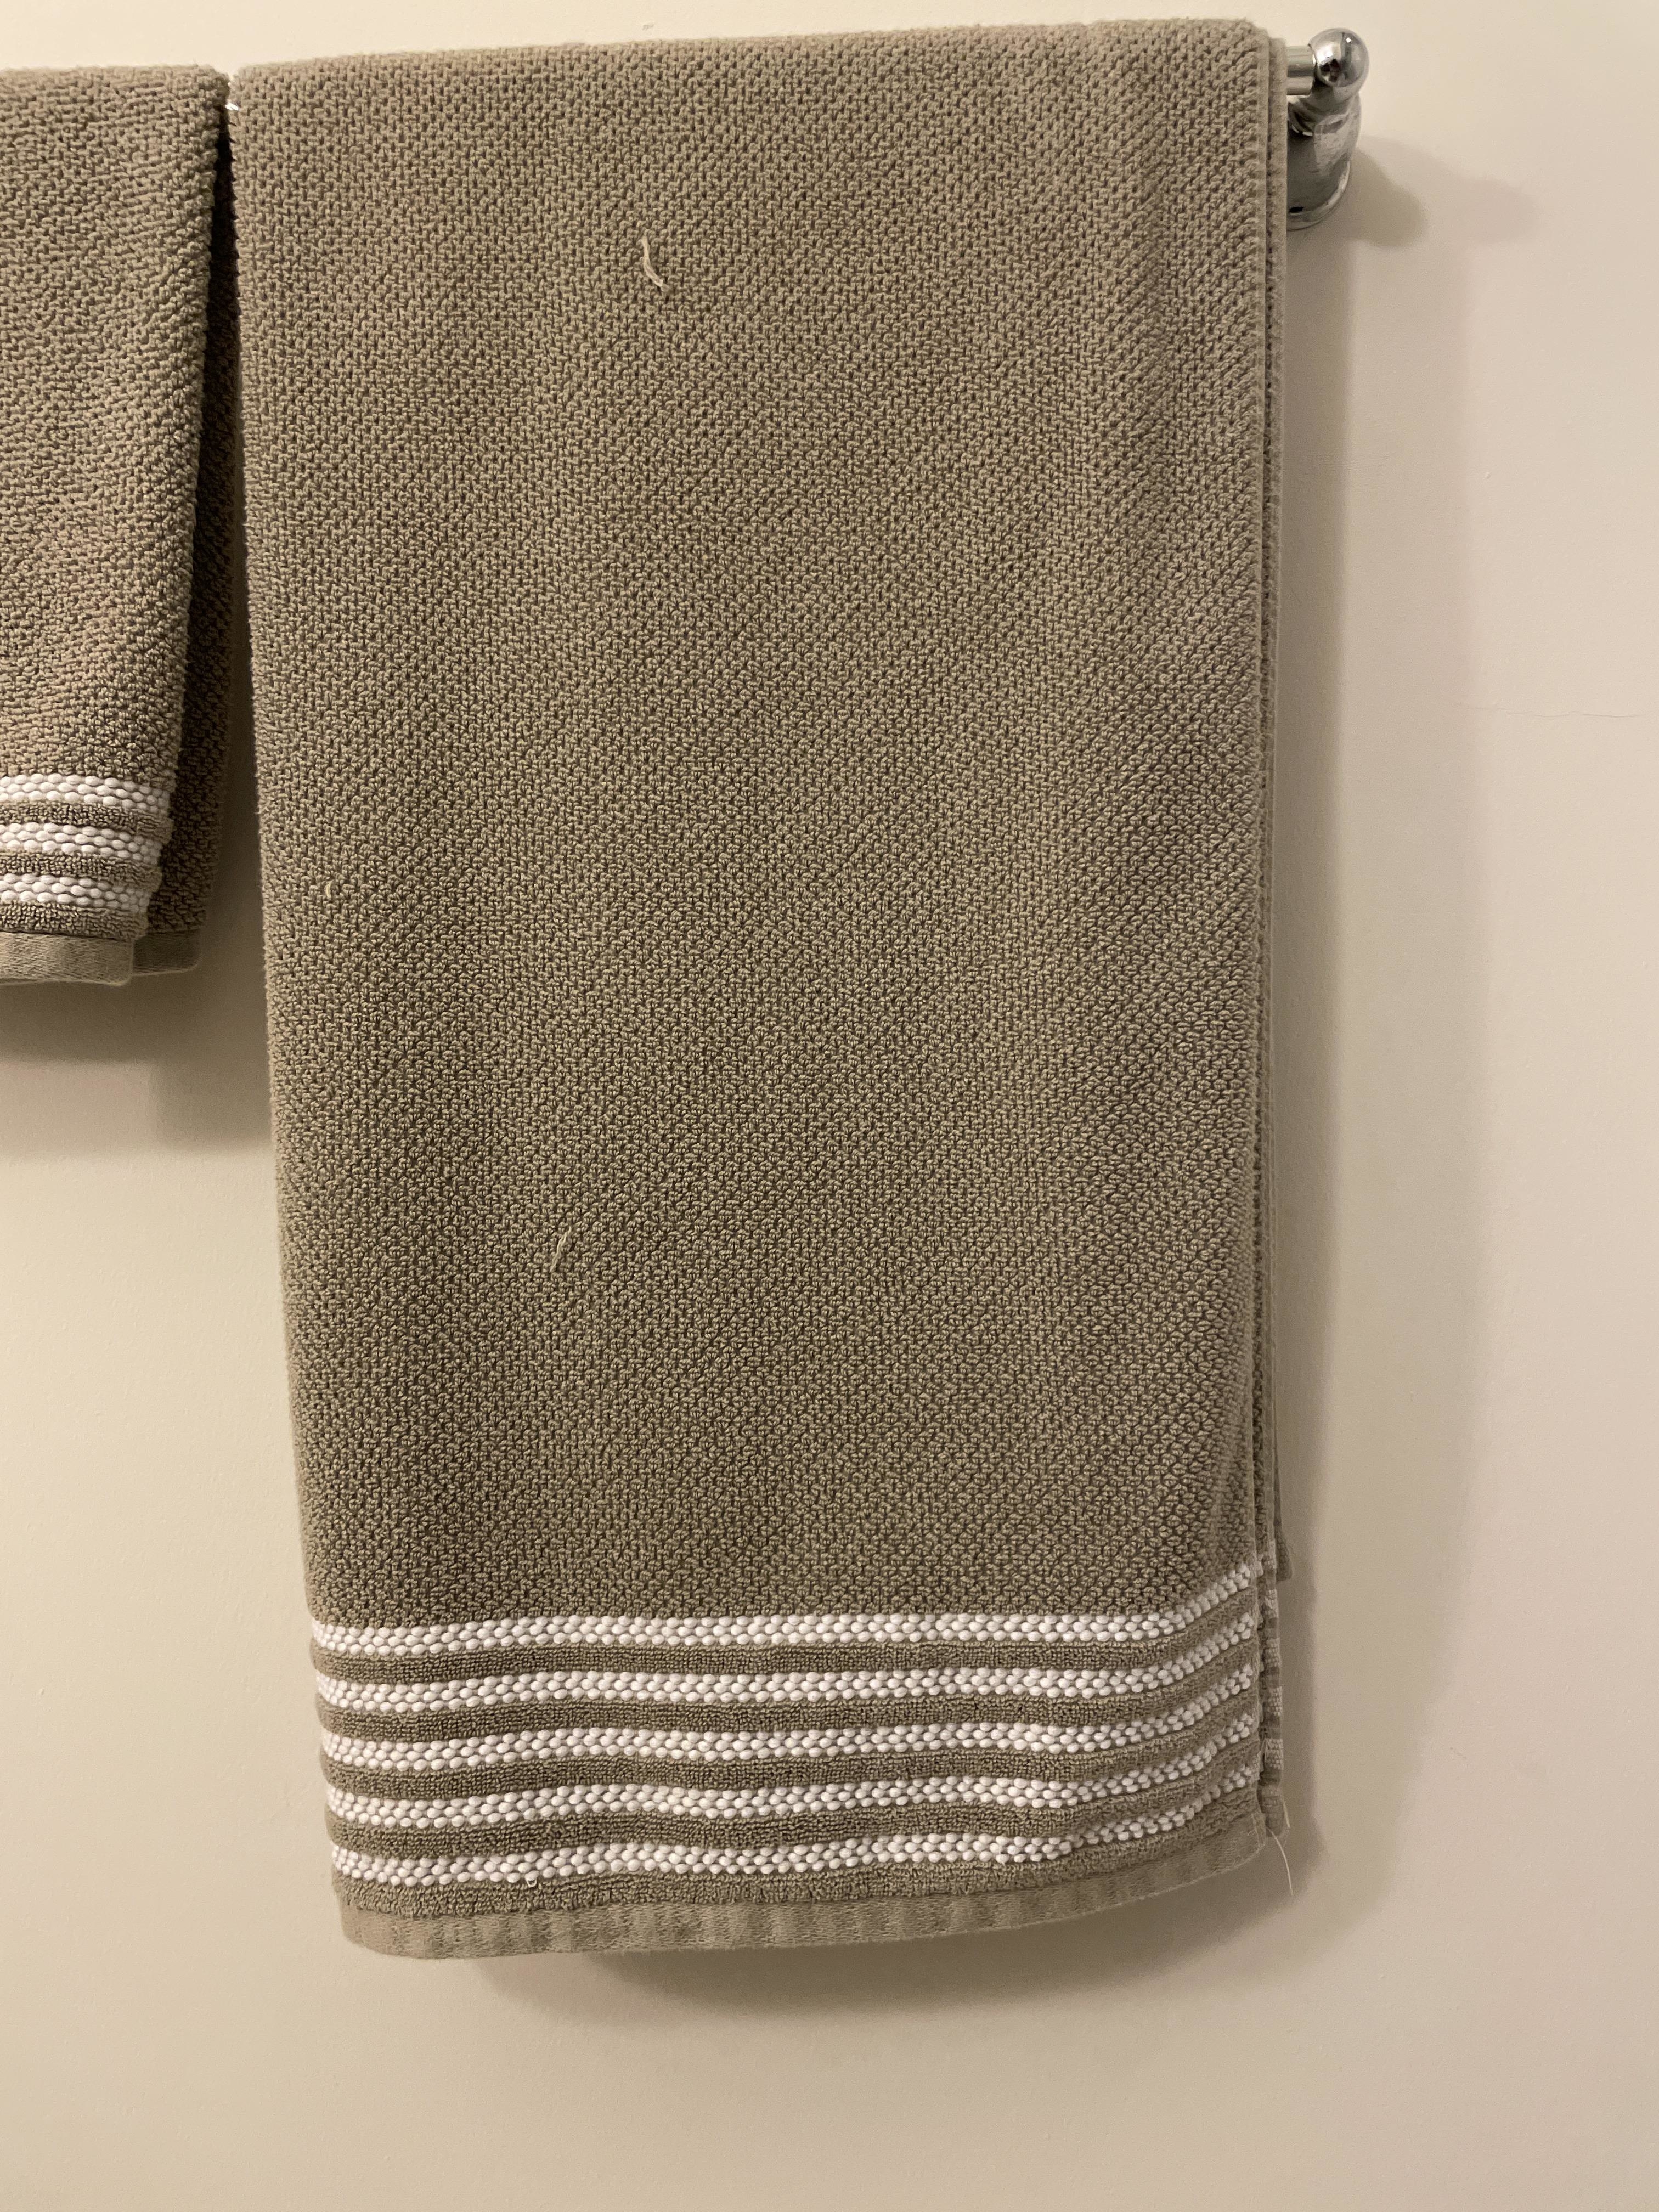 Beige towel hanging on a rack with decorative white stripes at the bottom